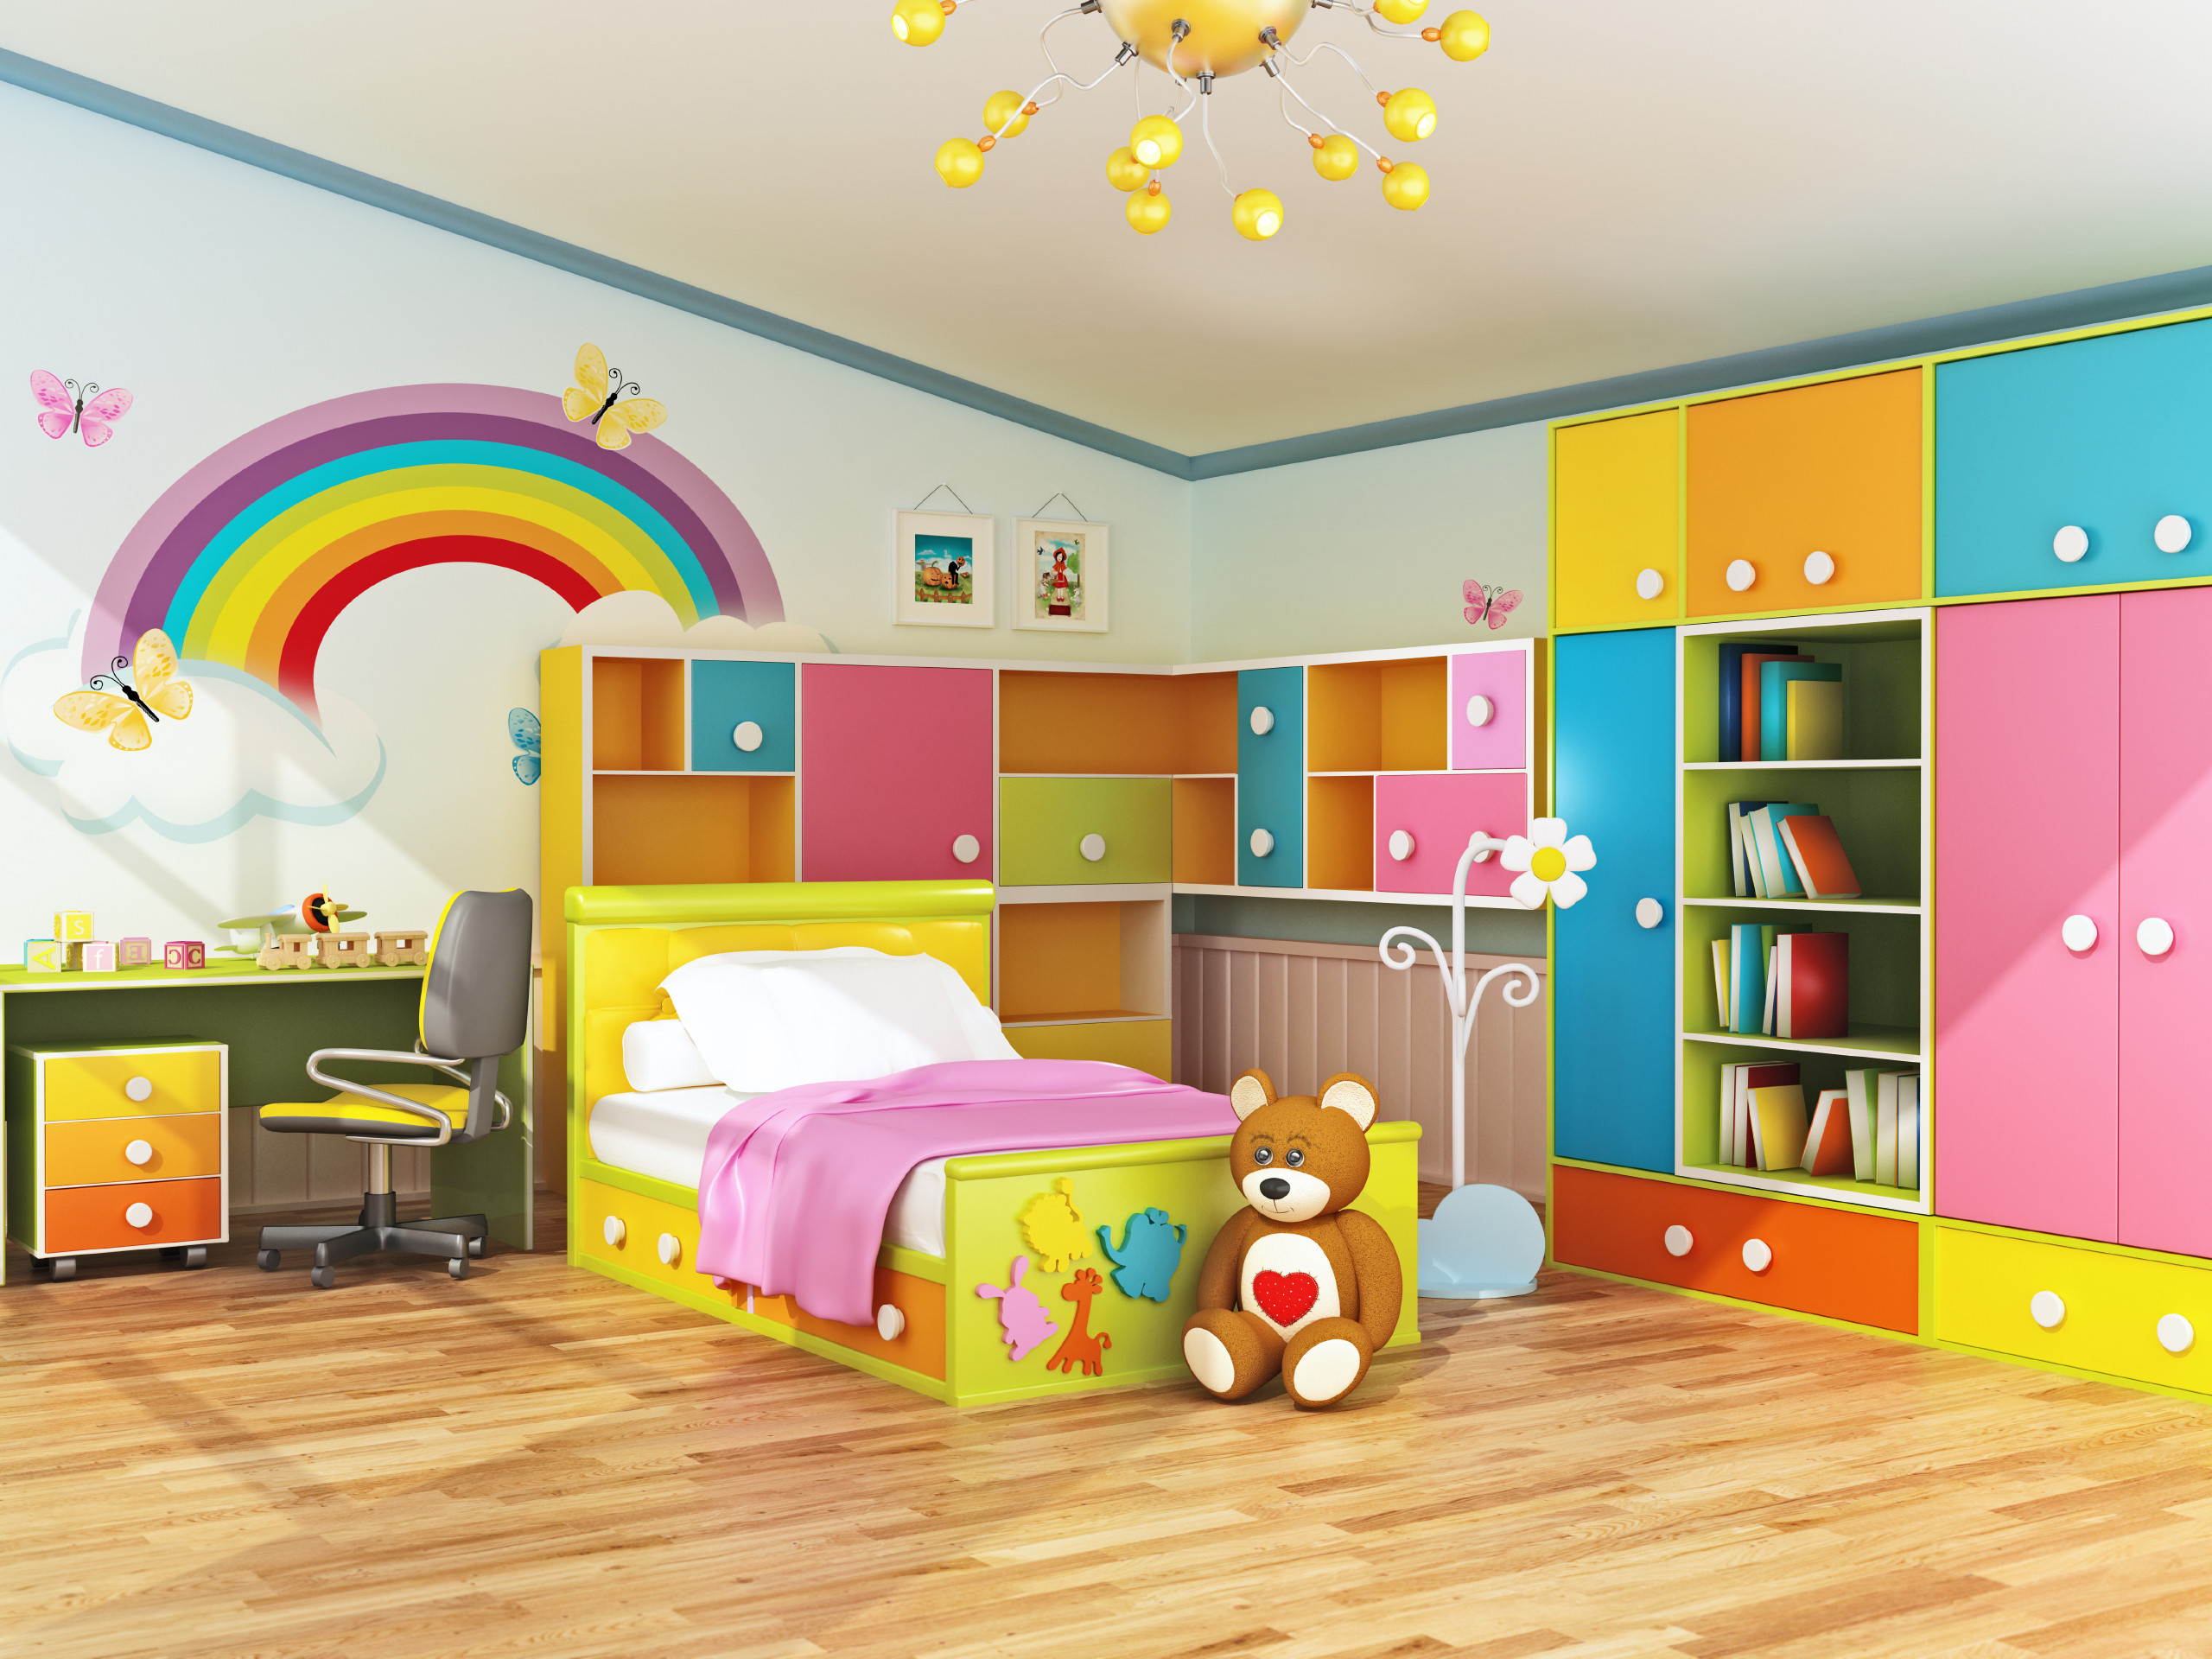 Wall Decoration For Kids Room
 Plan Ahead When Decorating Kids Bedrooms